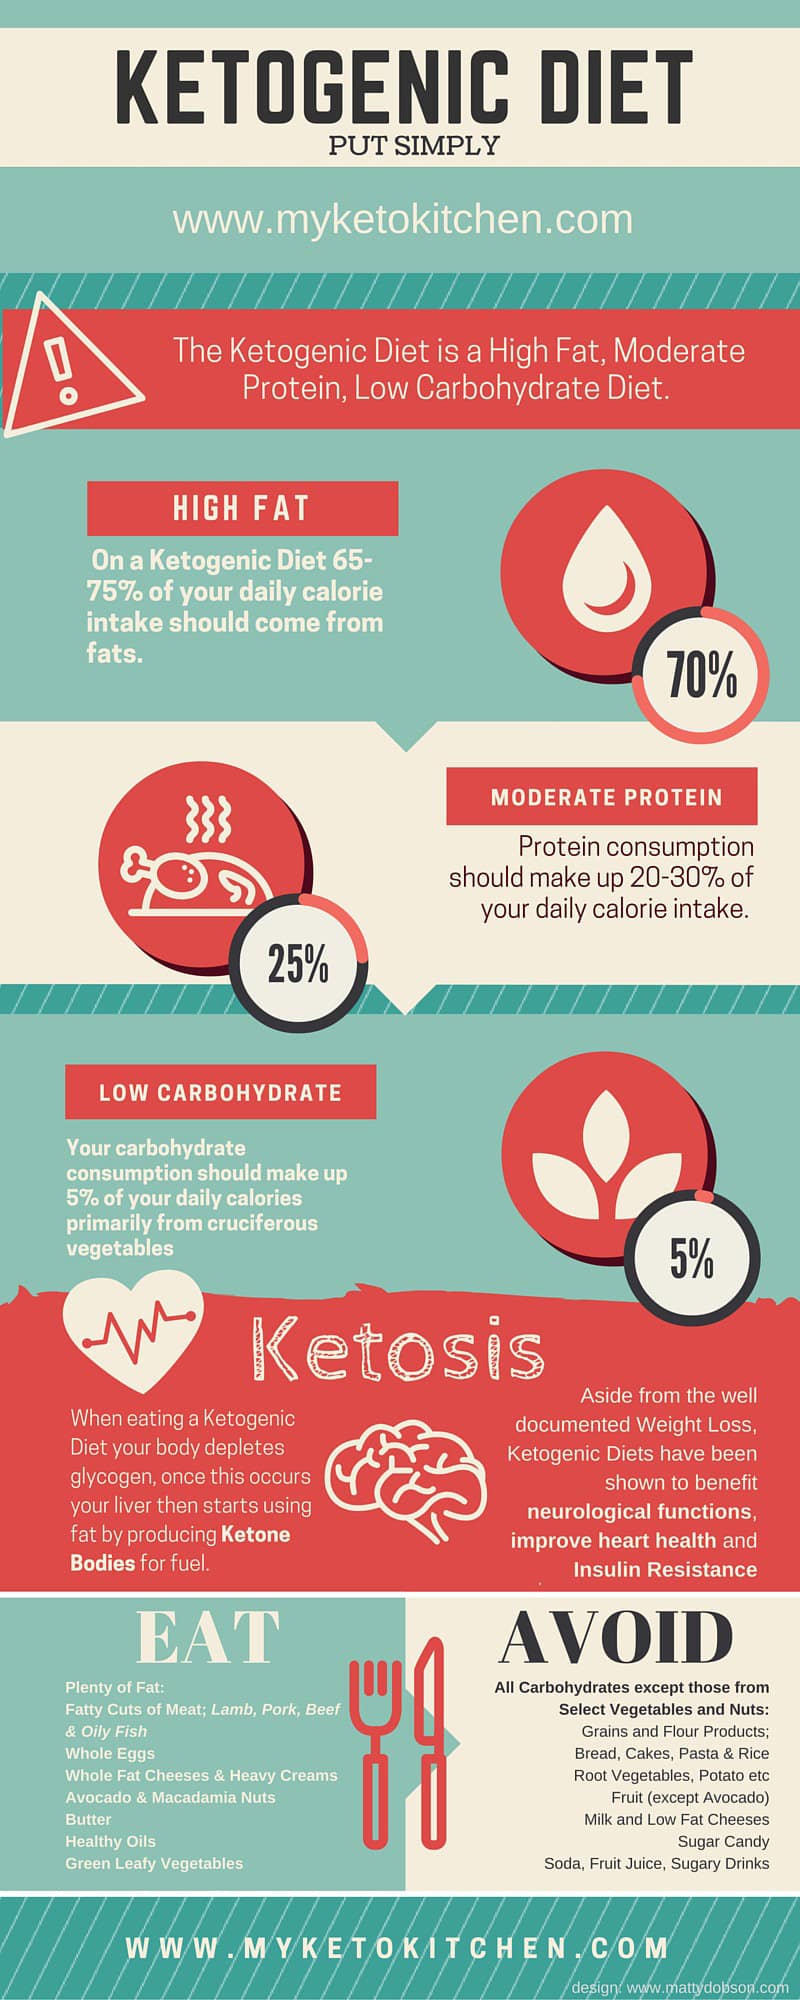 Ketogenic Diet, what is Keto and why do it? - My Keto Kitchen